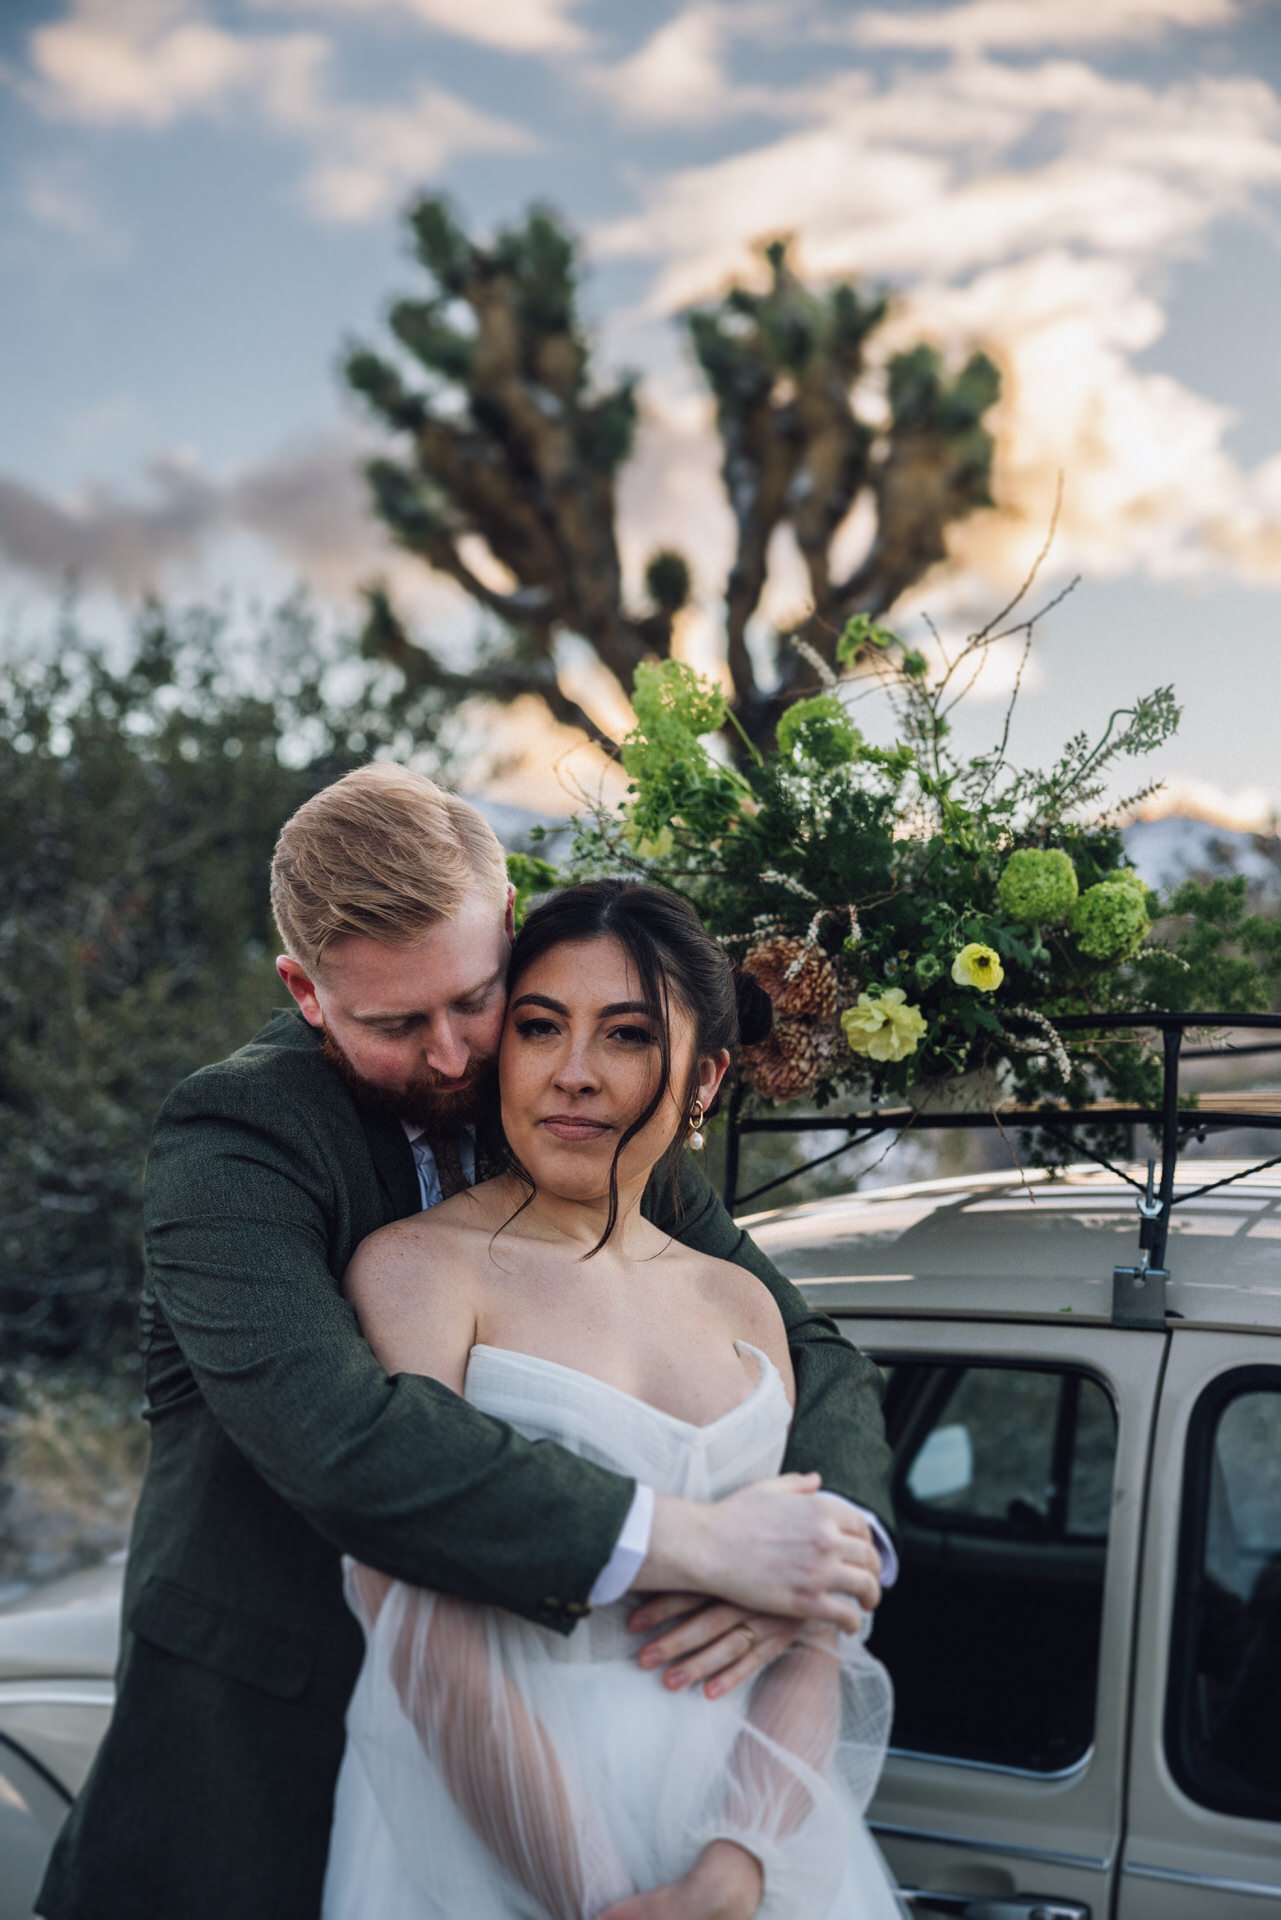 destination elopement and small wedding photographer / 4 reasons why you need a destination elopement photographer